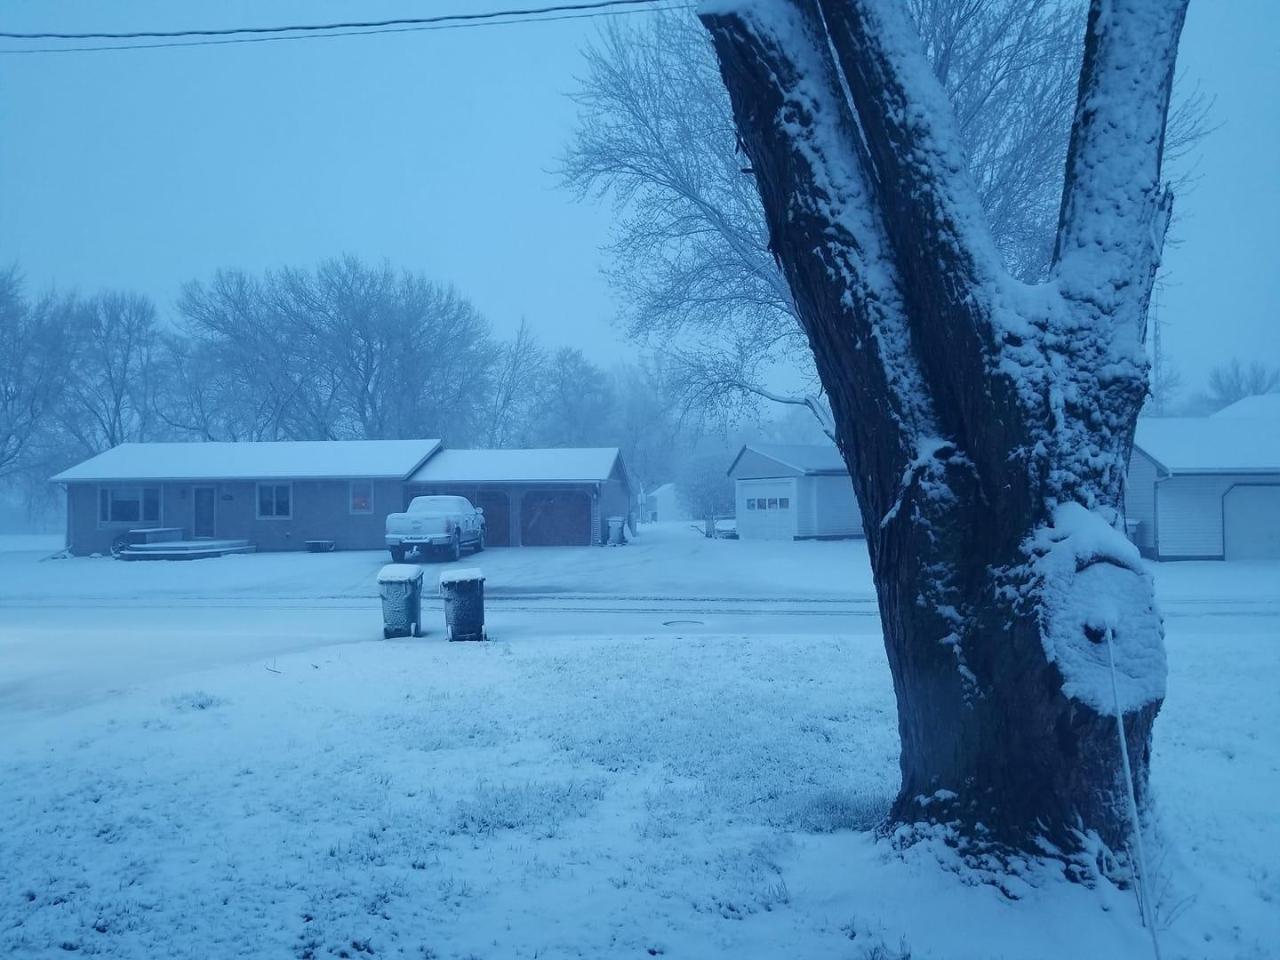 Snowfall in Russell, MN